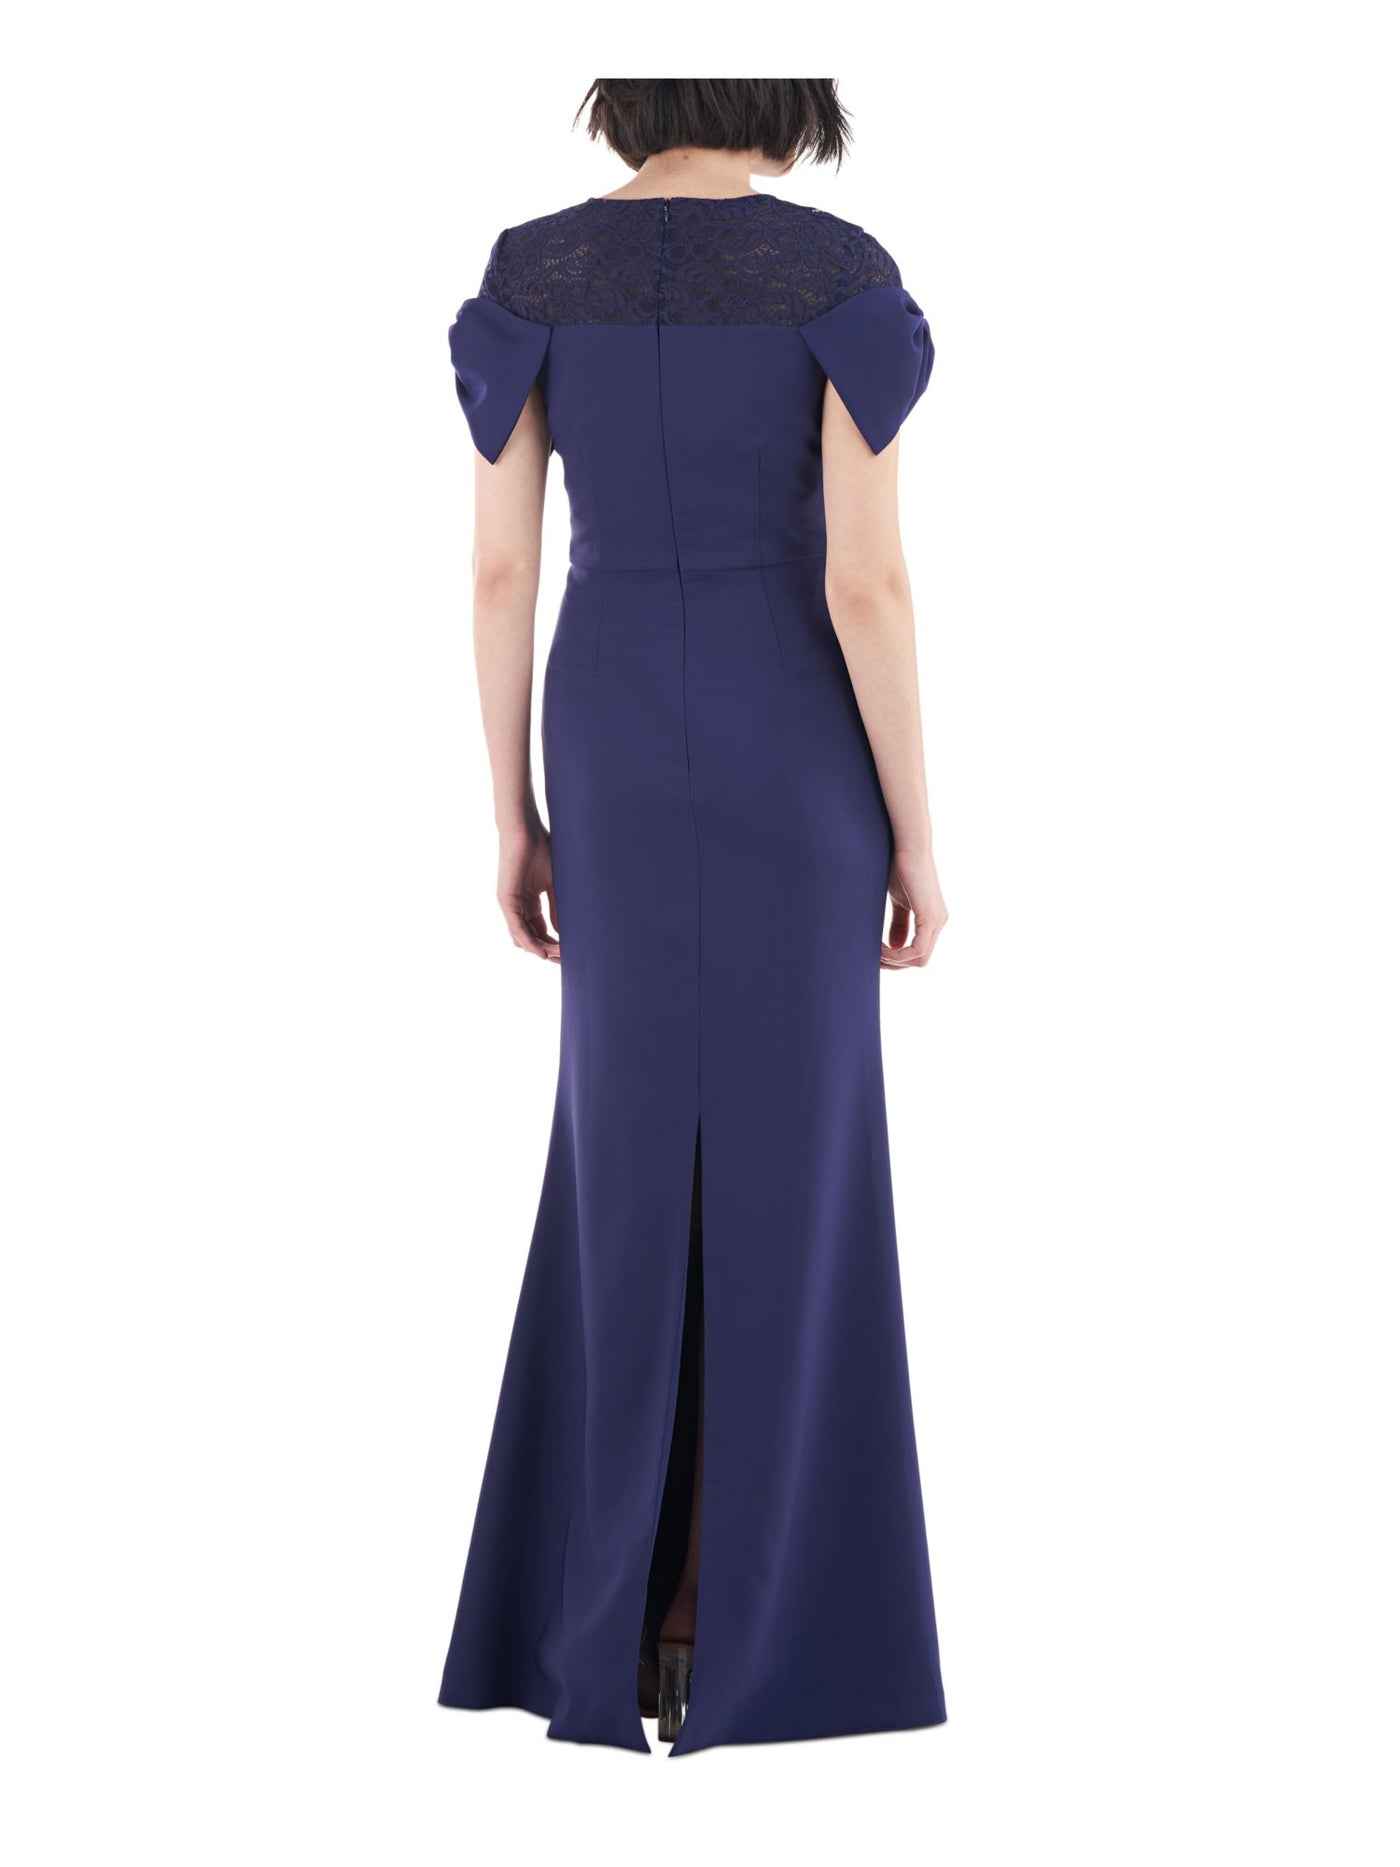 JS COLLECTIONS Womens Navy Zippered Slitted Bow Detail Cap Sleeves Crew Neck Full-Length Formal Gown Dress 14